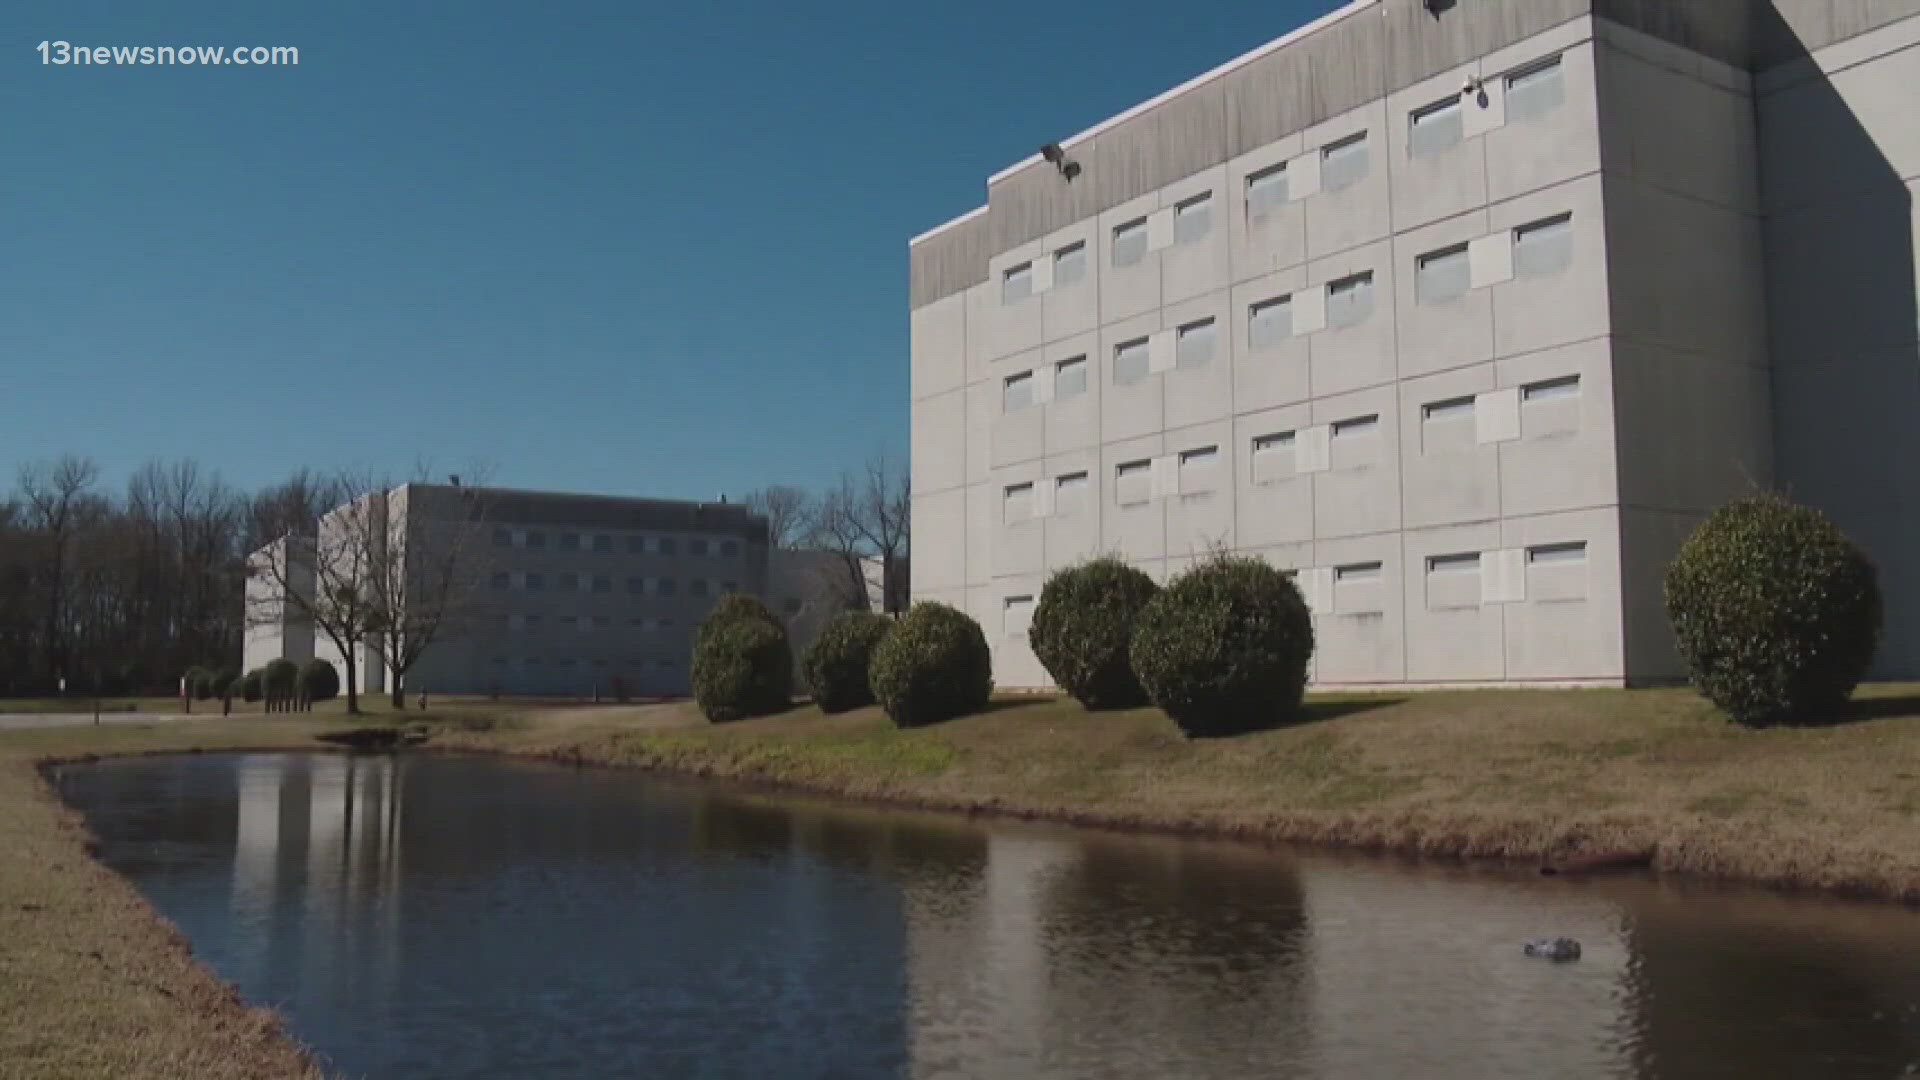 Portsmouth city leaders say it's time to say goodbye to the city's 55-year-old Waterfront Jail building.